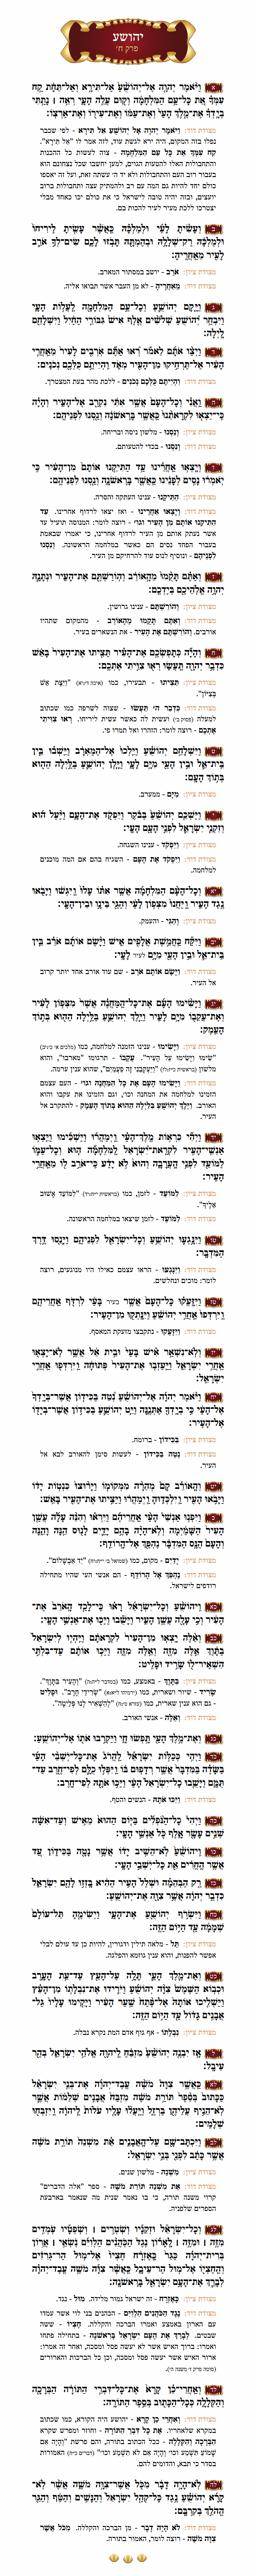 Sefer Yehoshua Chapter 8 with commentary